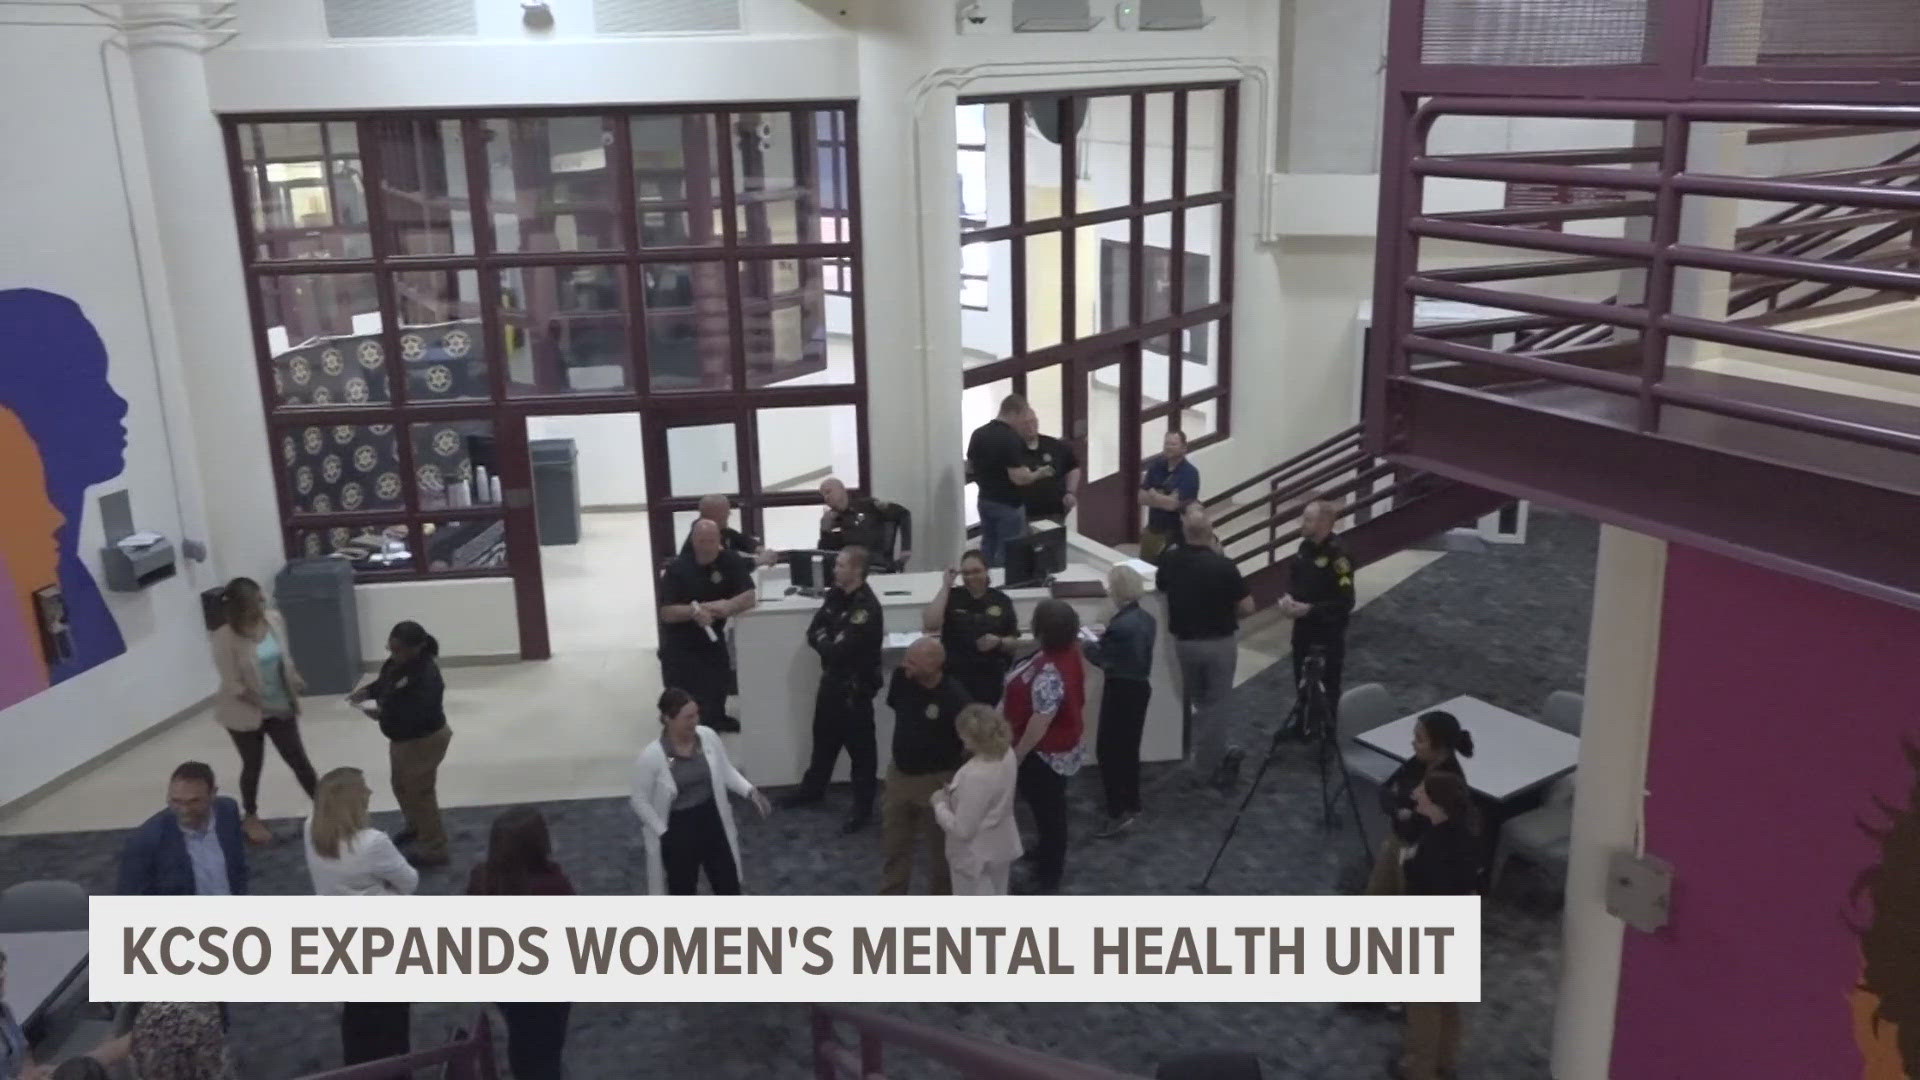 The until will provide mental health services to women to help them during and after incarceration.